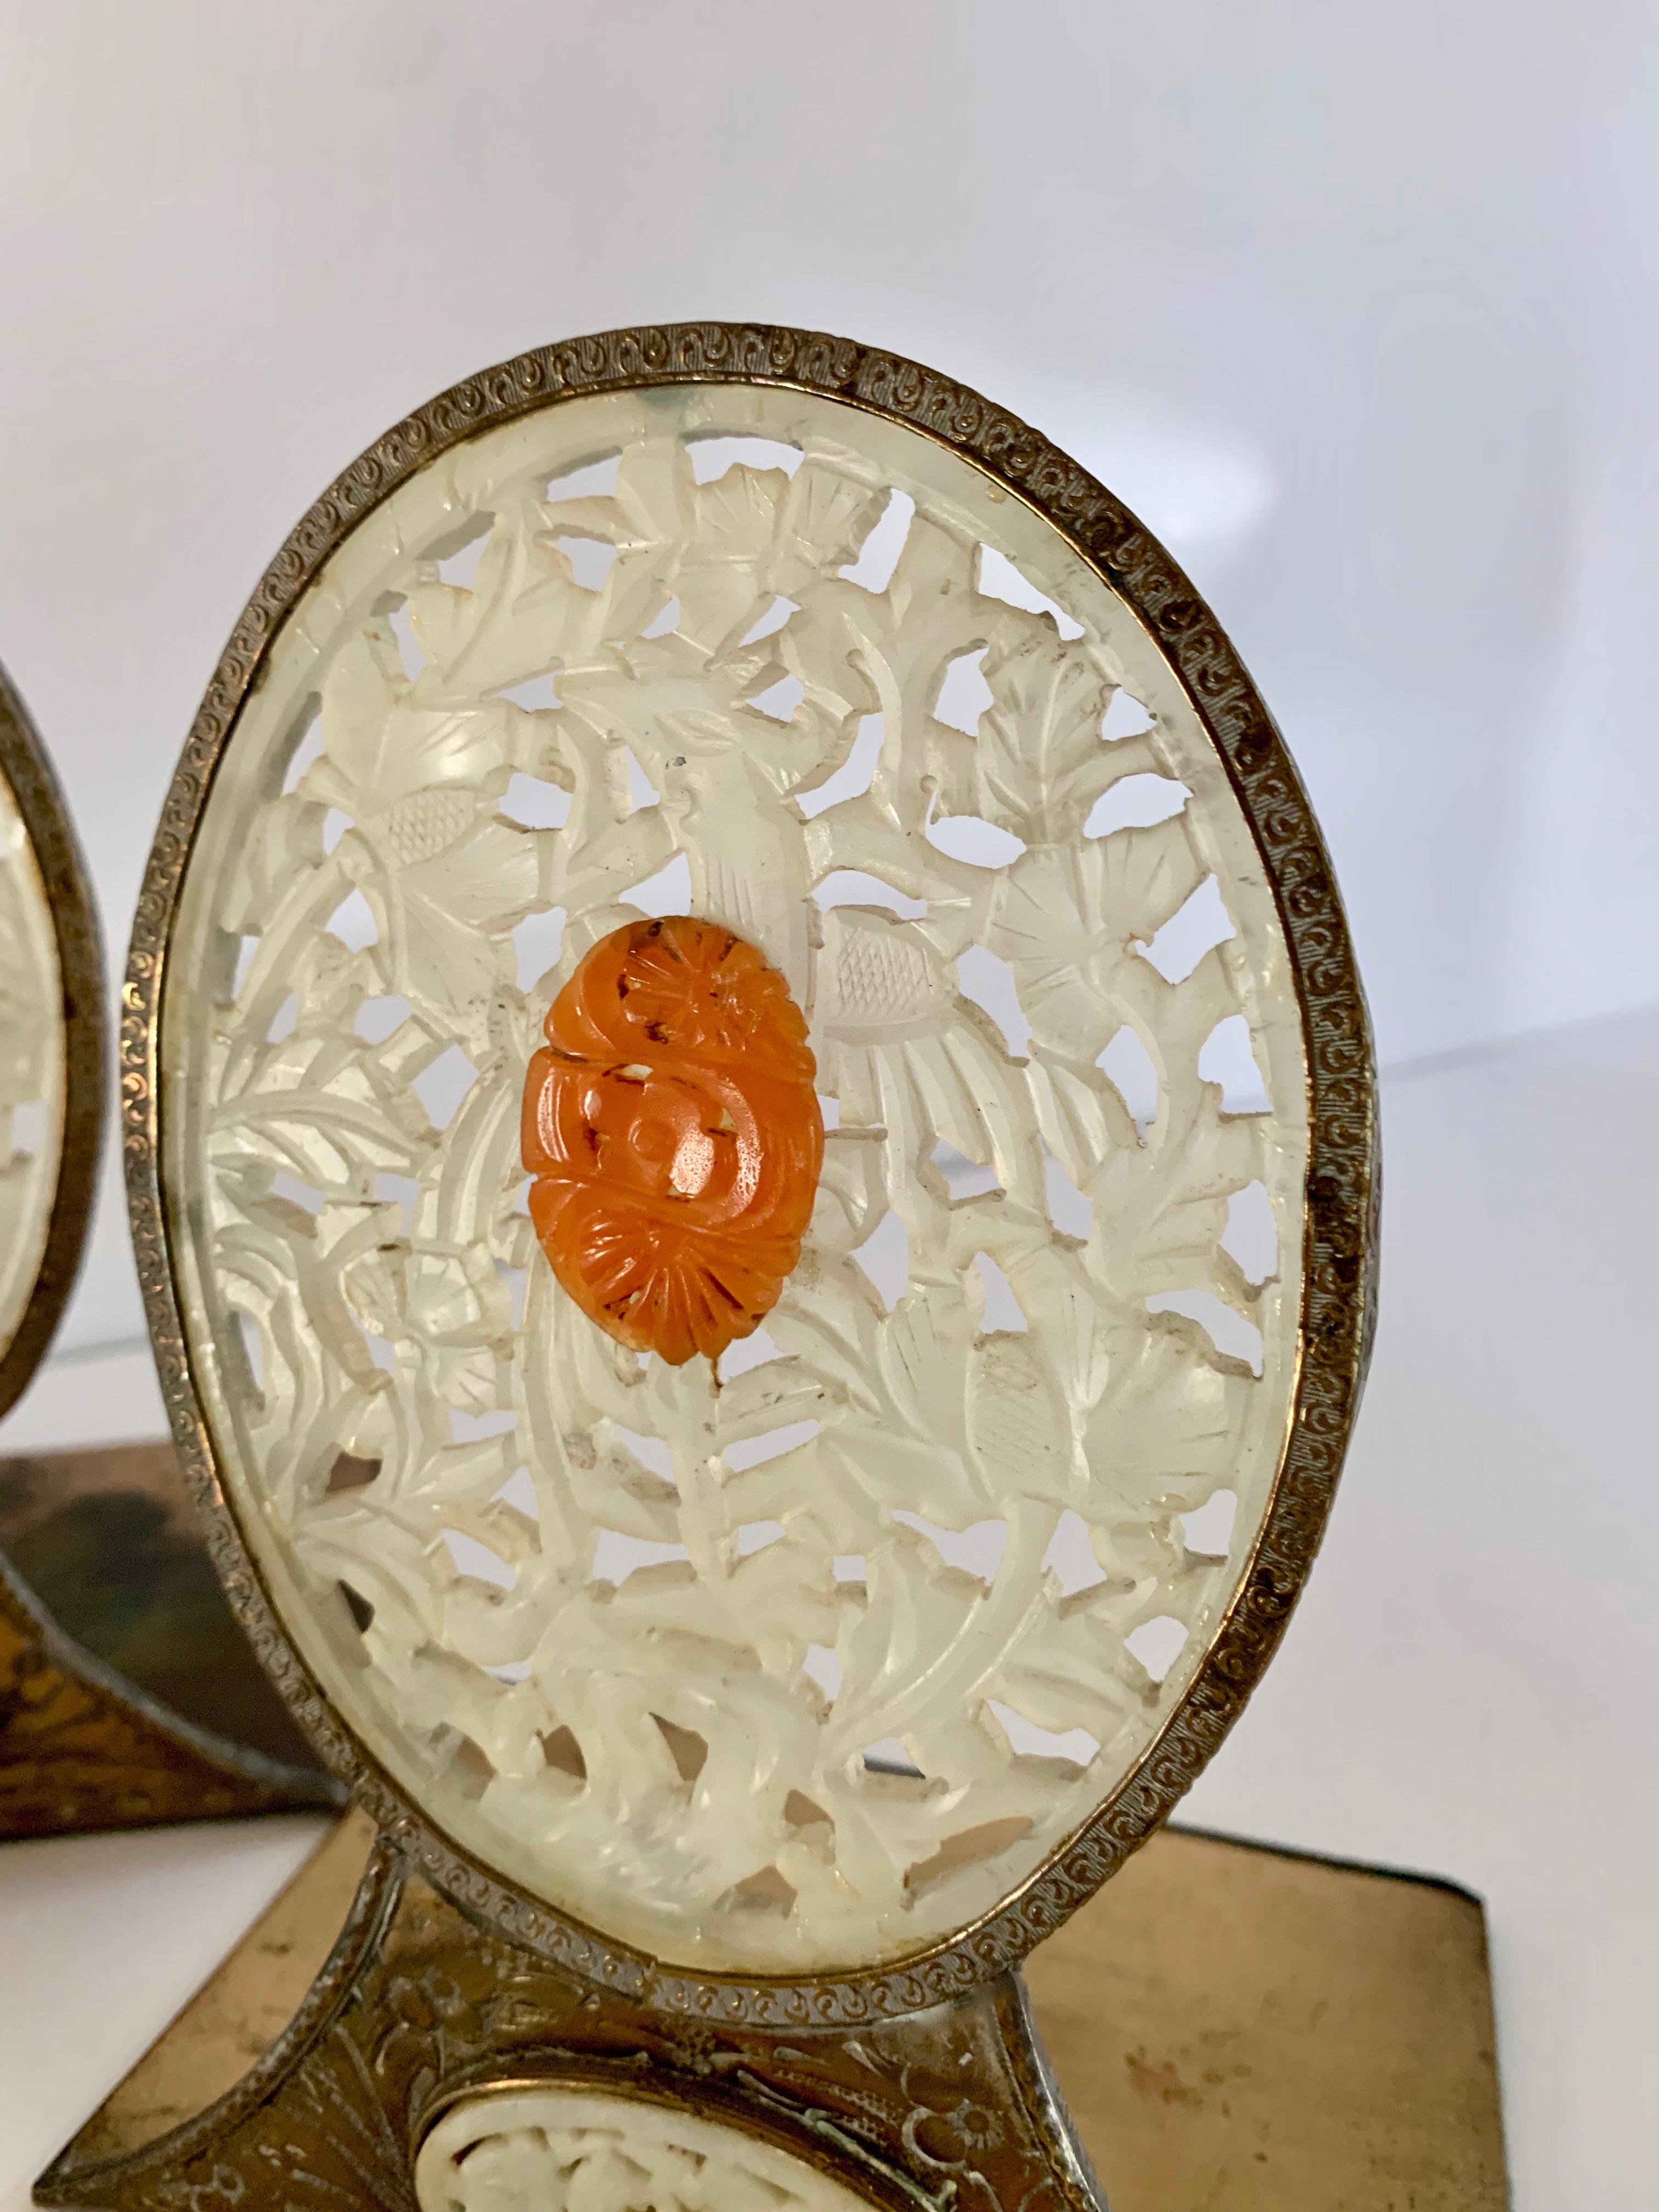 A wonderful pair of carved white jade and brass bookends, the pair have accents in Orange Jade and carved bone, with frame and stand in perfectly patinated brass - a stunning pair for the finest books in your collection. Perfectly suited for any